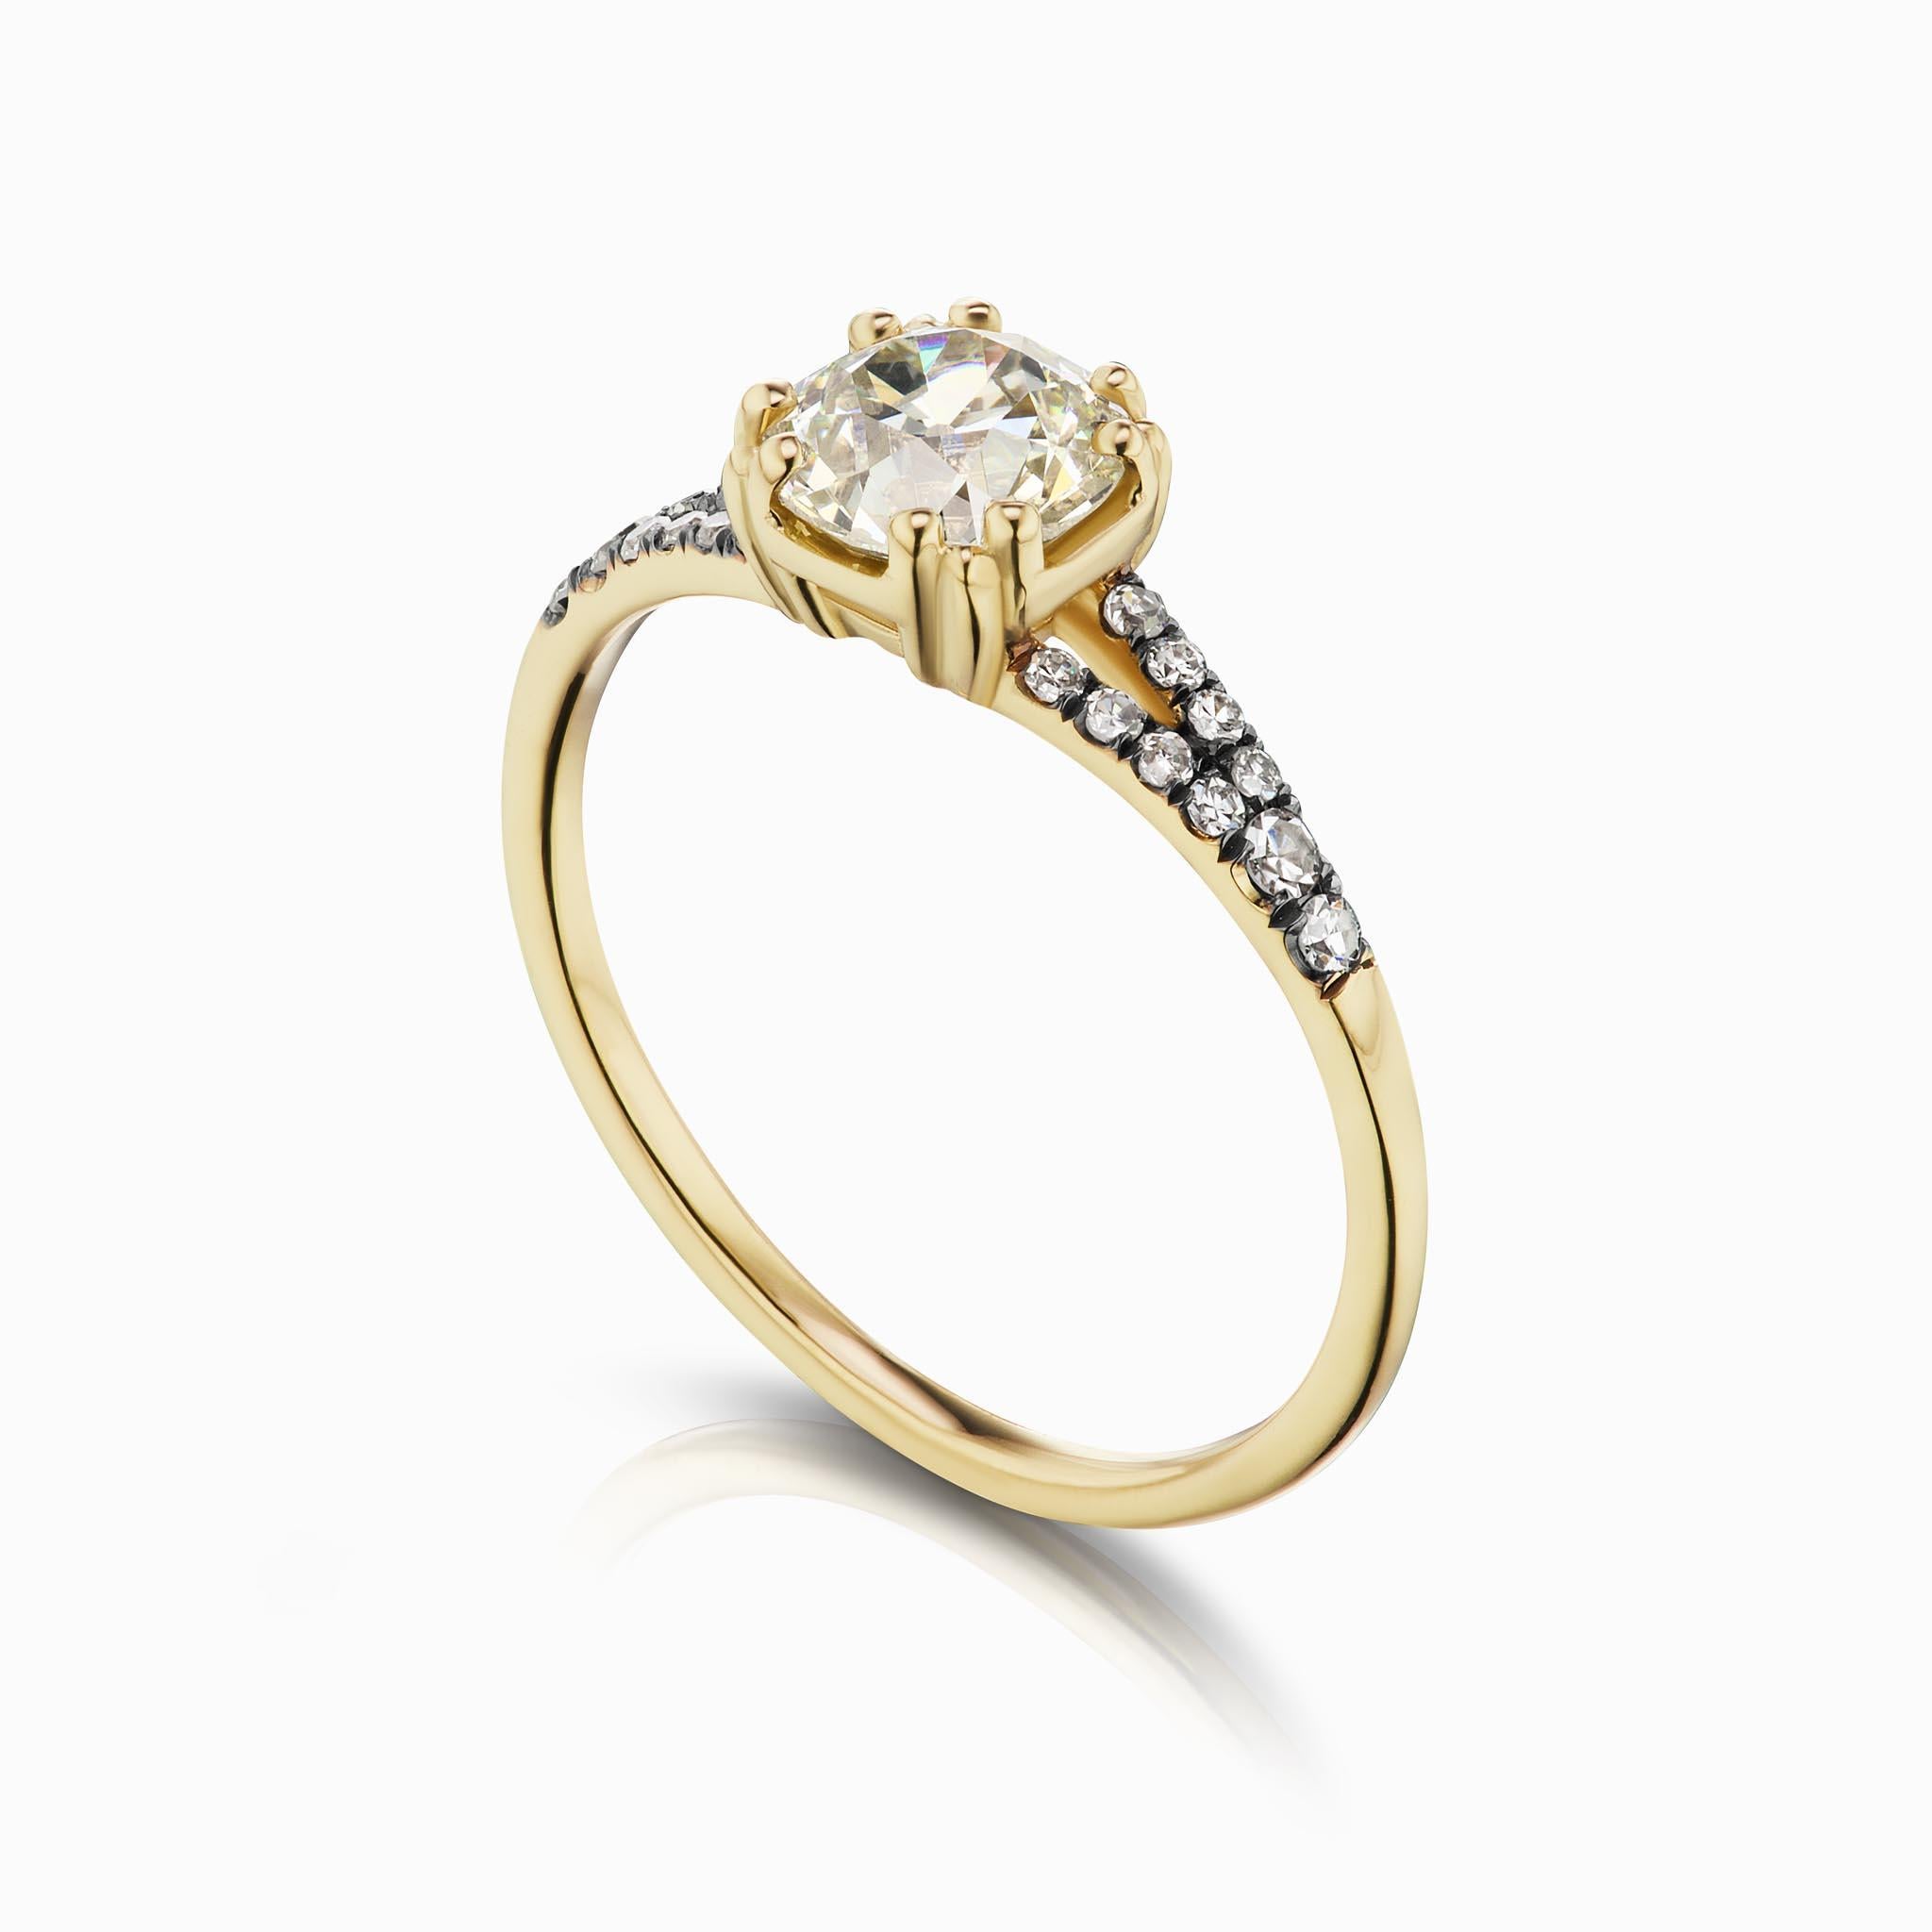 14k yellow gold ring with an Antique Reclaimed 4.8mm round Old European Cut White Diamond (0.35 ct), with pavé of white diamonds on split shank band (0.16 ctw). Size 7.

This Devotion ring is antique inspired in its design elements. Featuring an